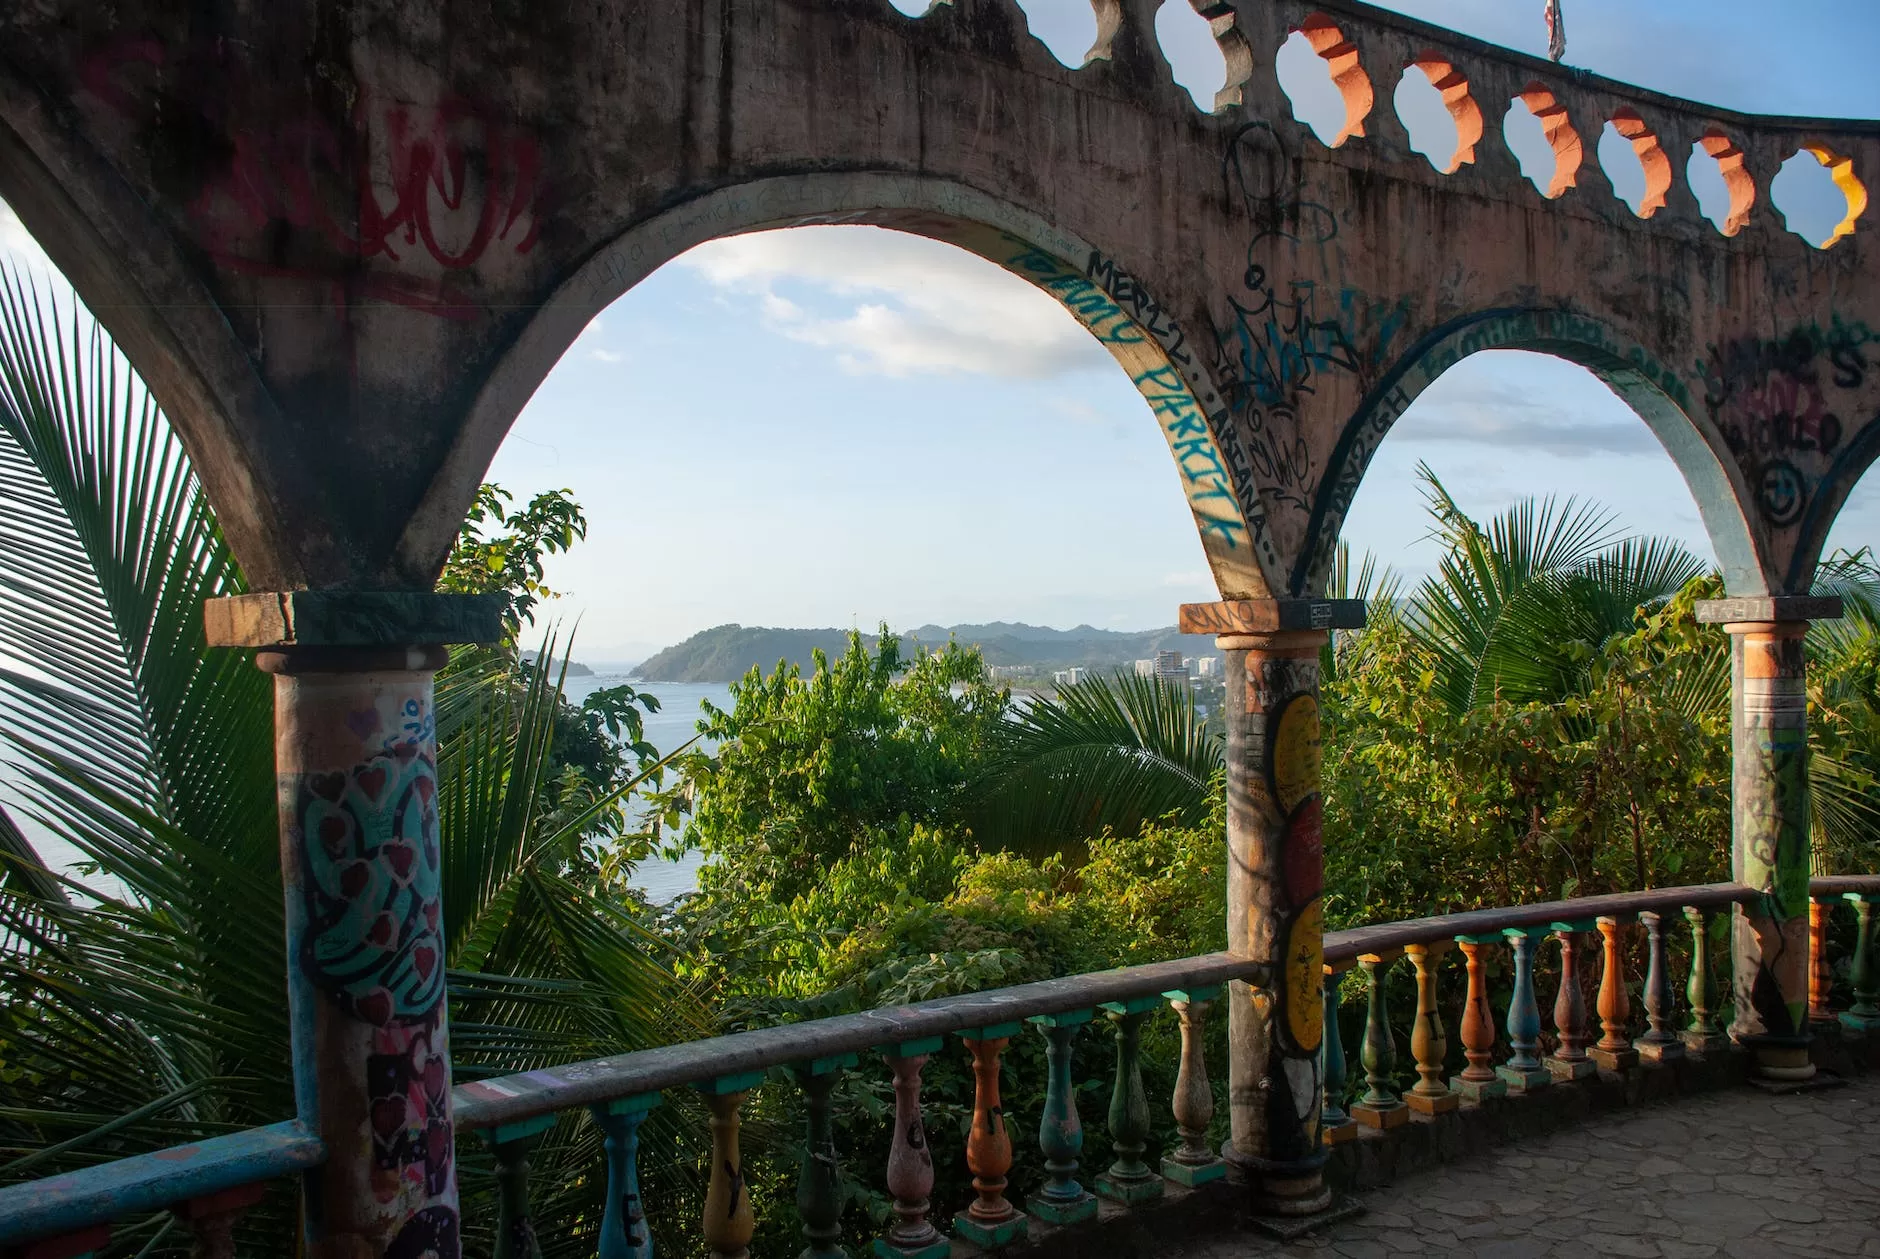 graffiti covered archs at a viewpoint in jaco costa rica